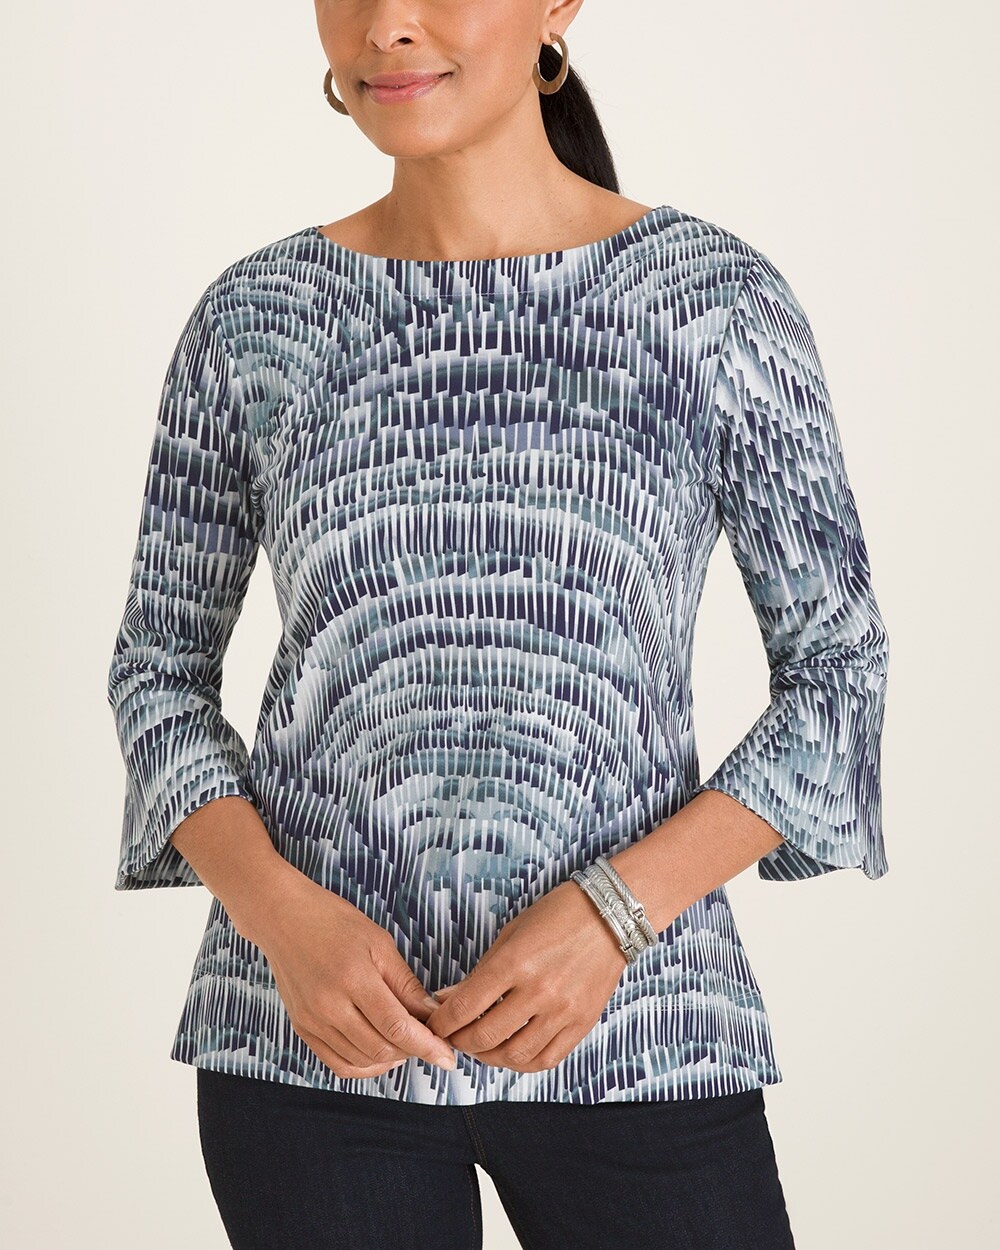 Cool-Toned Wave-Print Top